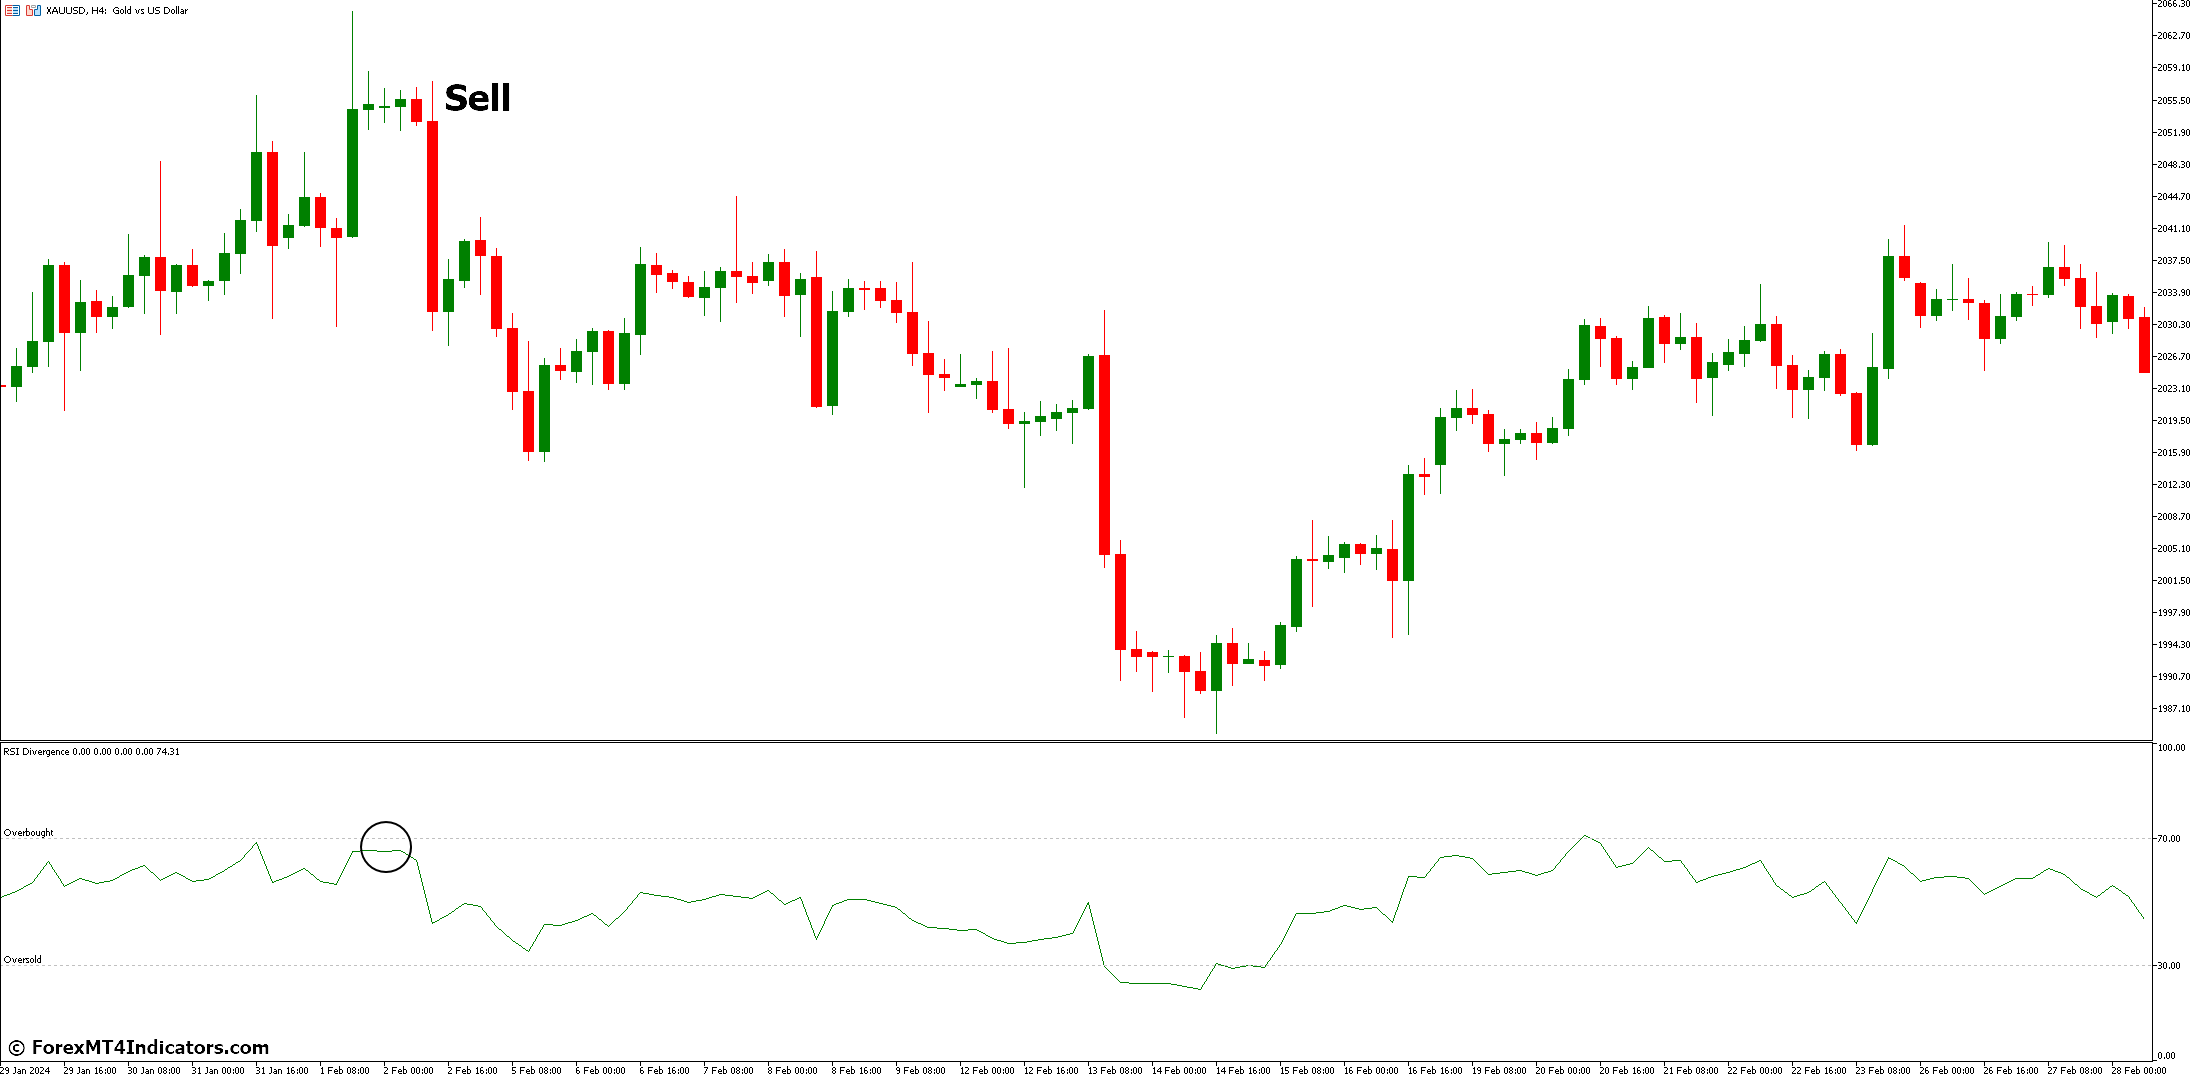 How to Trade with RSI Divergence Indicator - Sell Entry